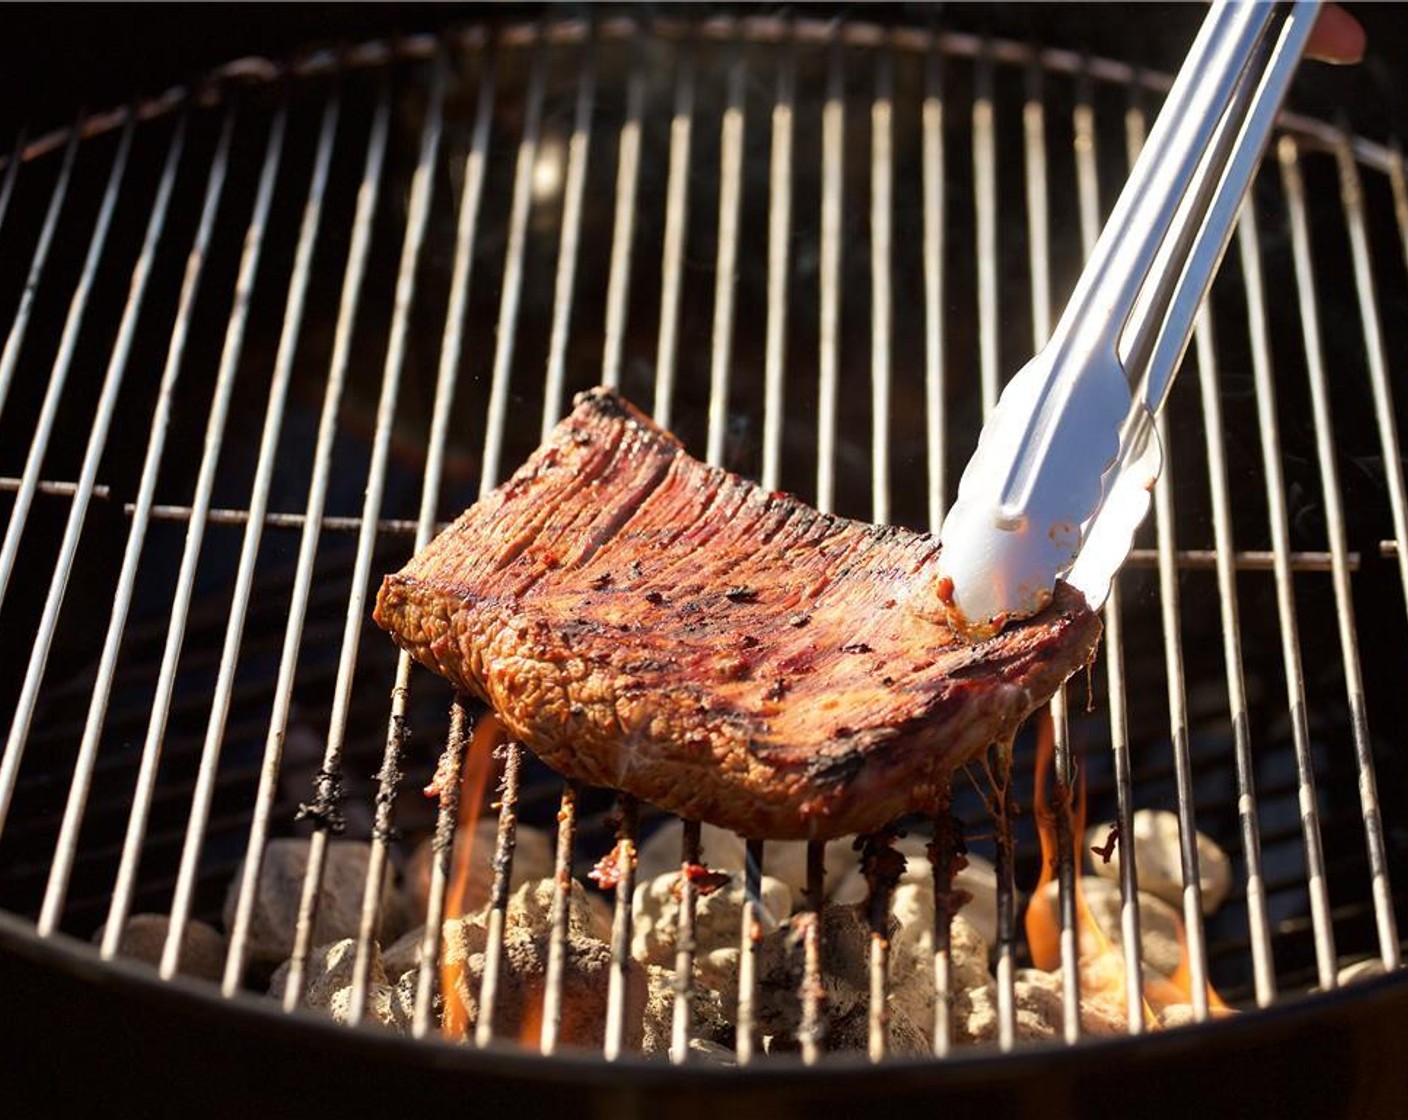 step 14 Place the flank steak on the hottest side of the grill and cook for 2 minutes. After 2 minutes give the steak a quarter turn on the grill to create cross hatch grill mark.